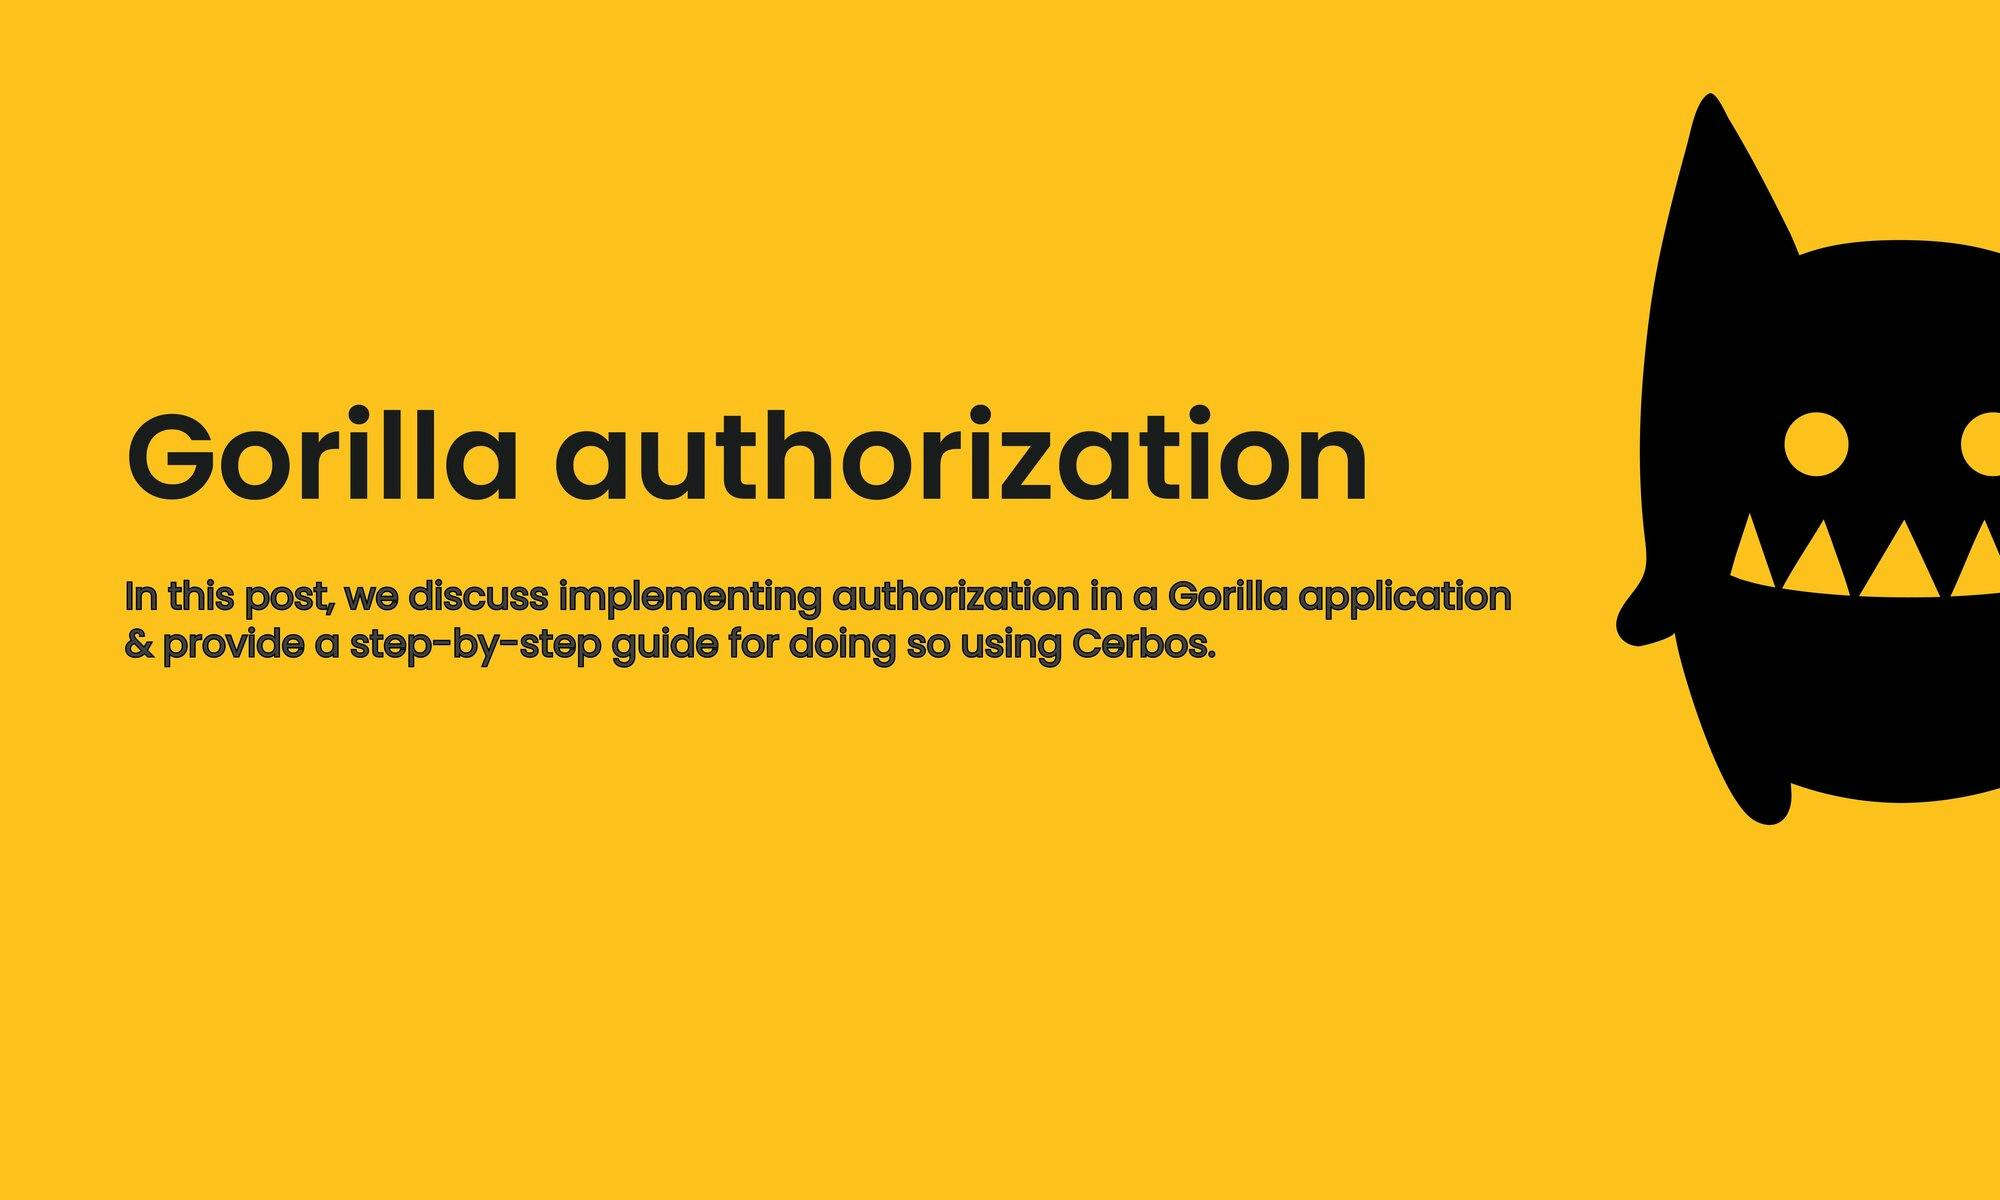 How to implement authorization in a Gorilla application